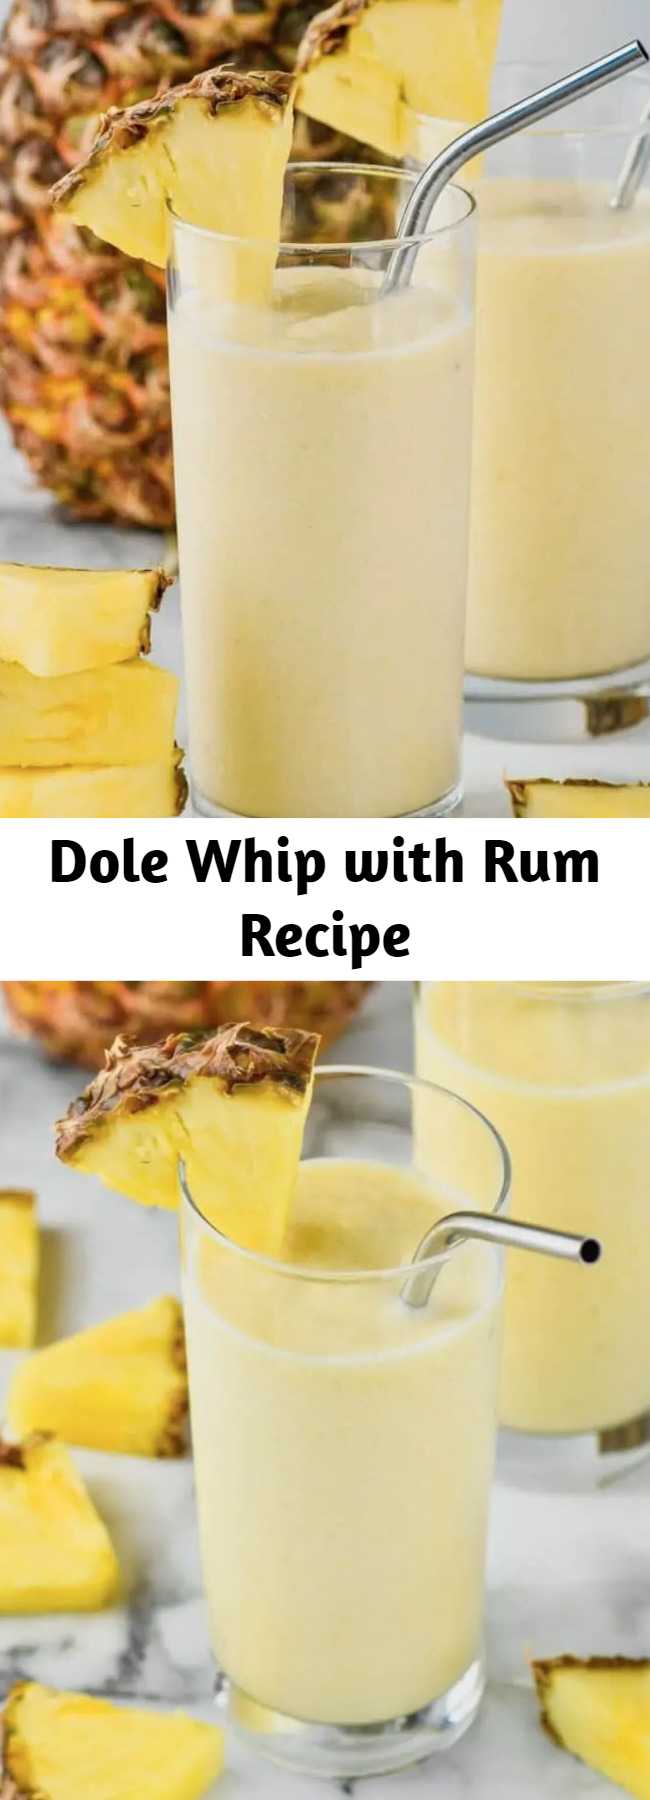 Dole Whip with Rum Recipe - This Disneyland Dole Whip recipe with Rum is the perfect frozen cocktail! Made with only four ingredients, get your sunny vacation fix at home!